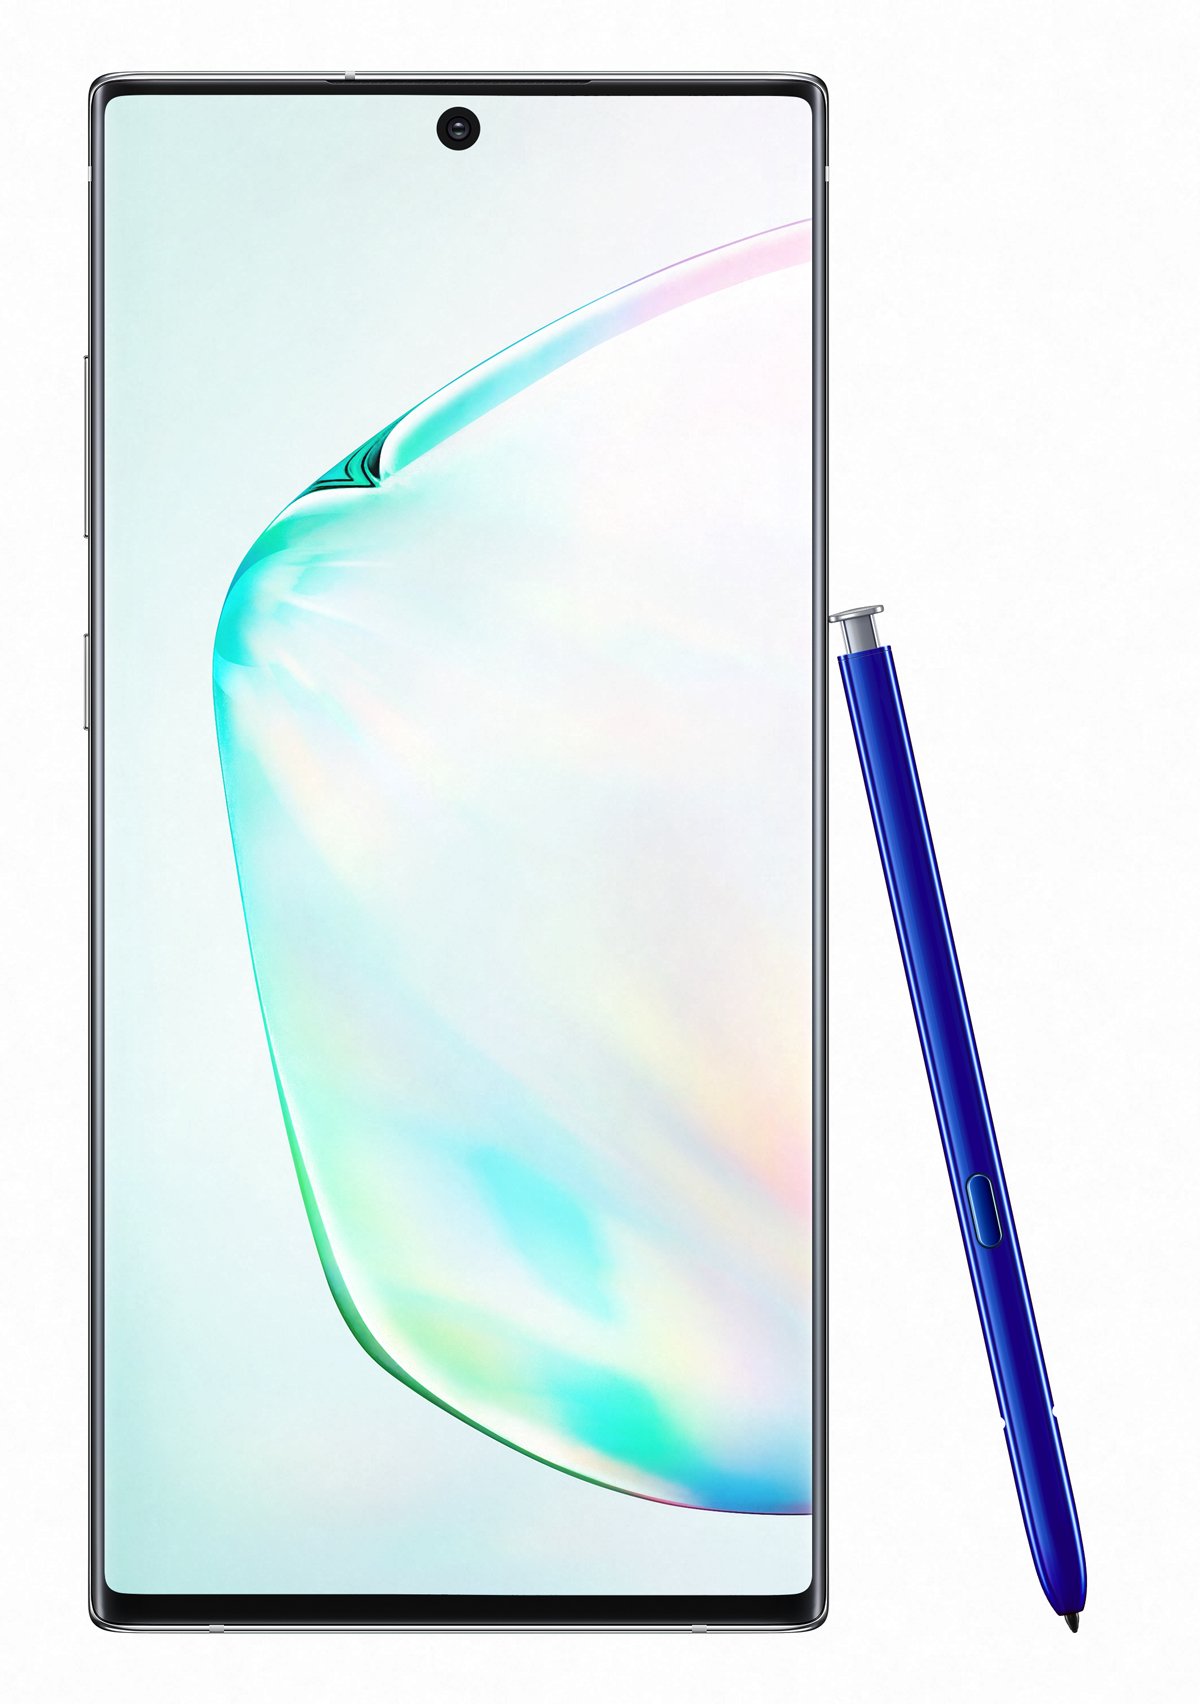 Samsung Galaxy Note 10 5g Specs Review Release Date Phonesdata